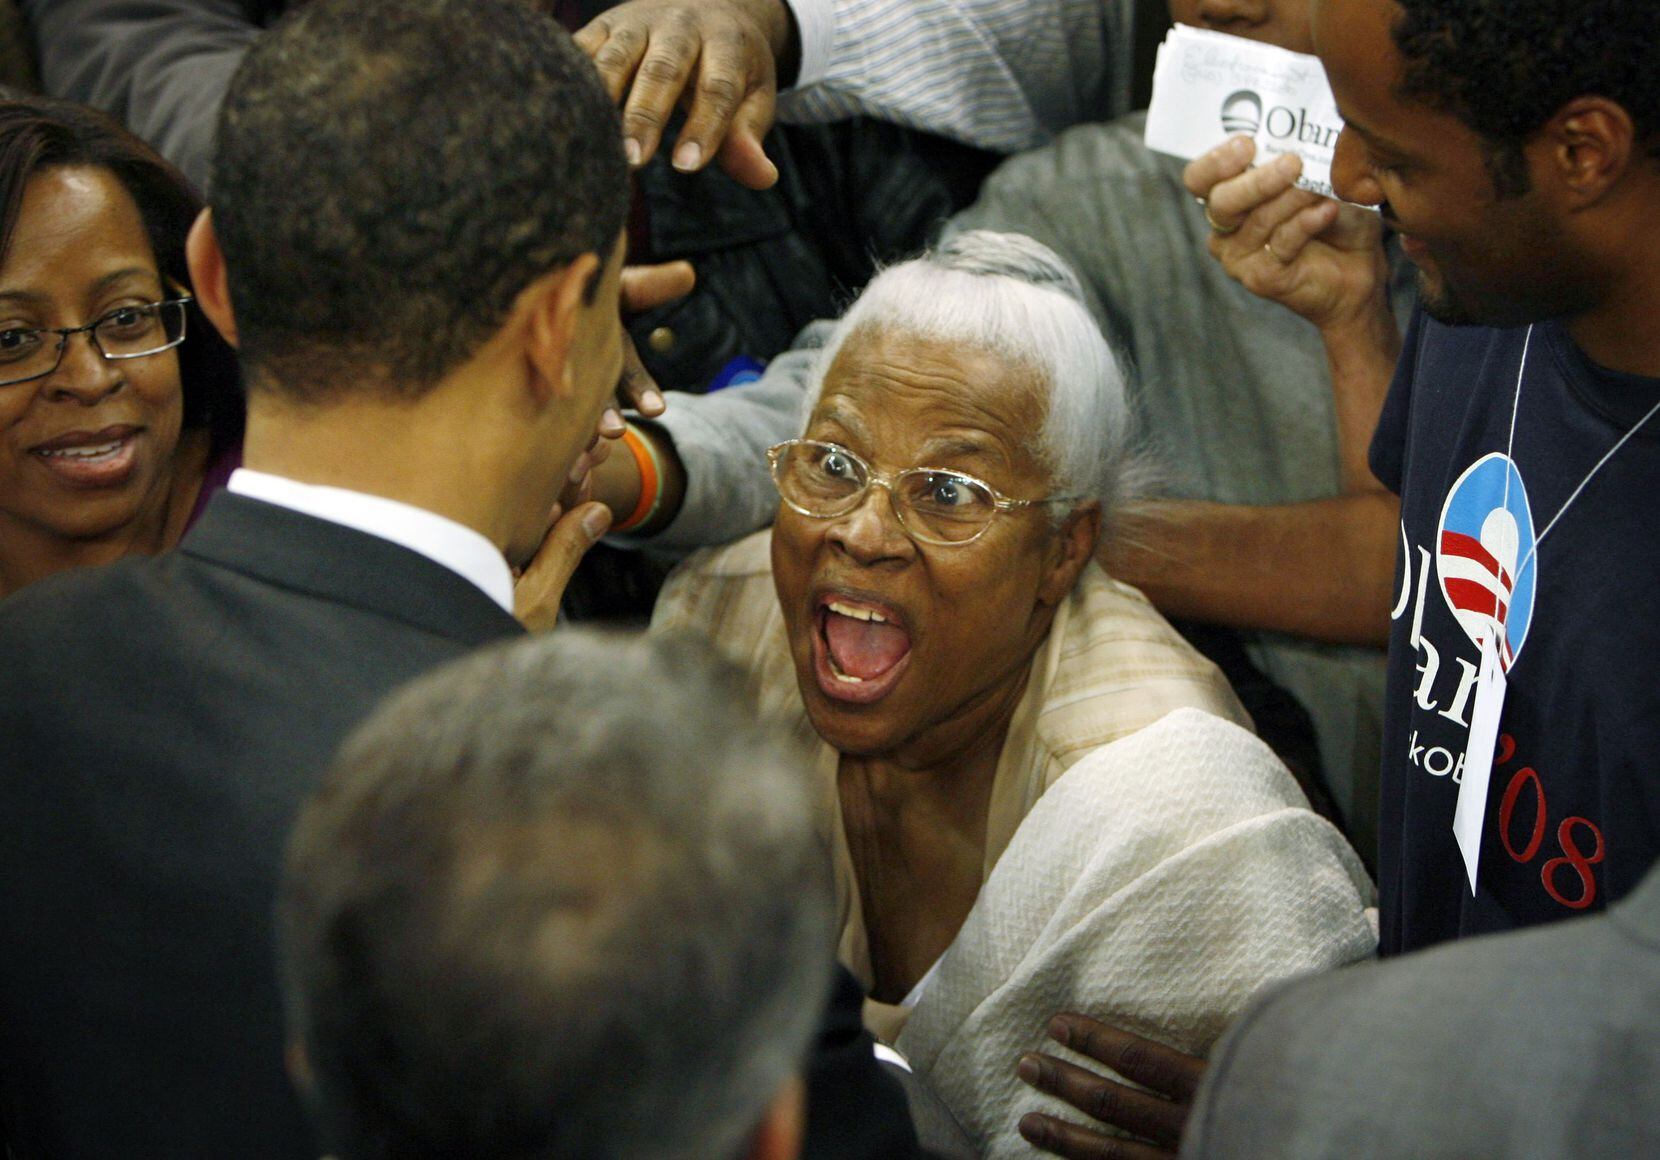 Then Sen. Barack Obama meets Opal Lee in the crowd after delivering a speech during a presidential campaign rally at the Fort Worth Convention Center in Fort Worth on Thursday, February 28, 2008.